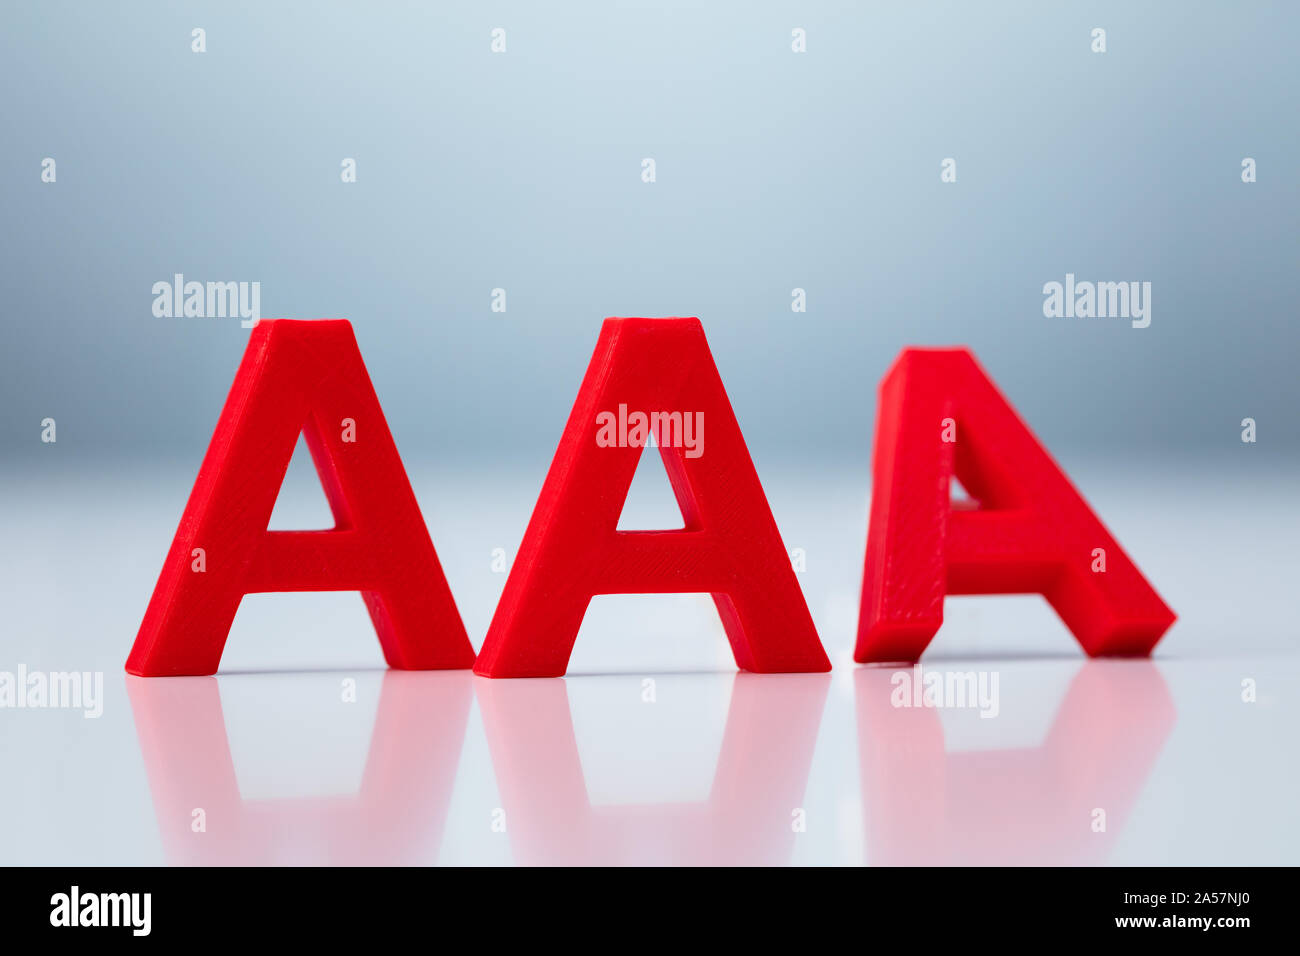 Credit Rating Decrease From AAA to AA Concept Stock Photo